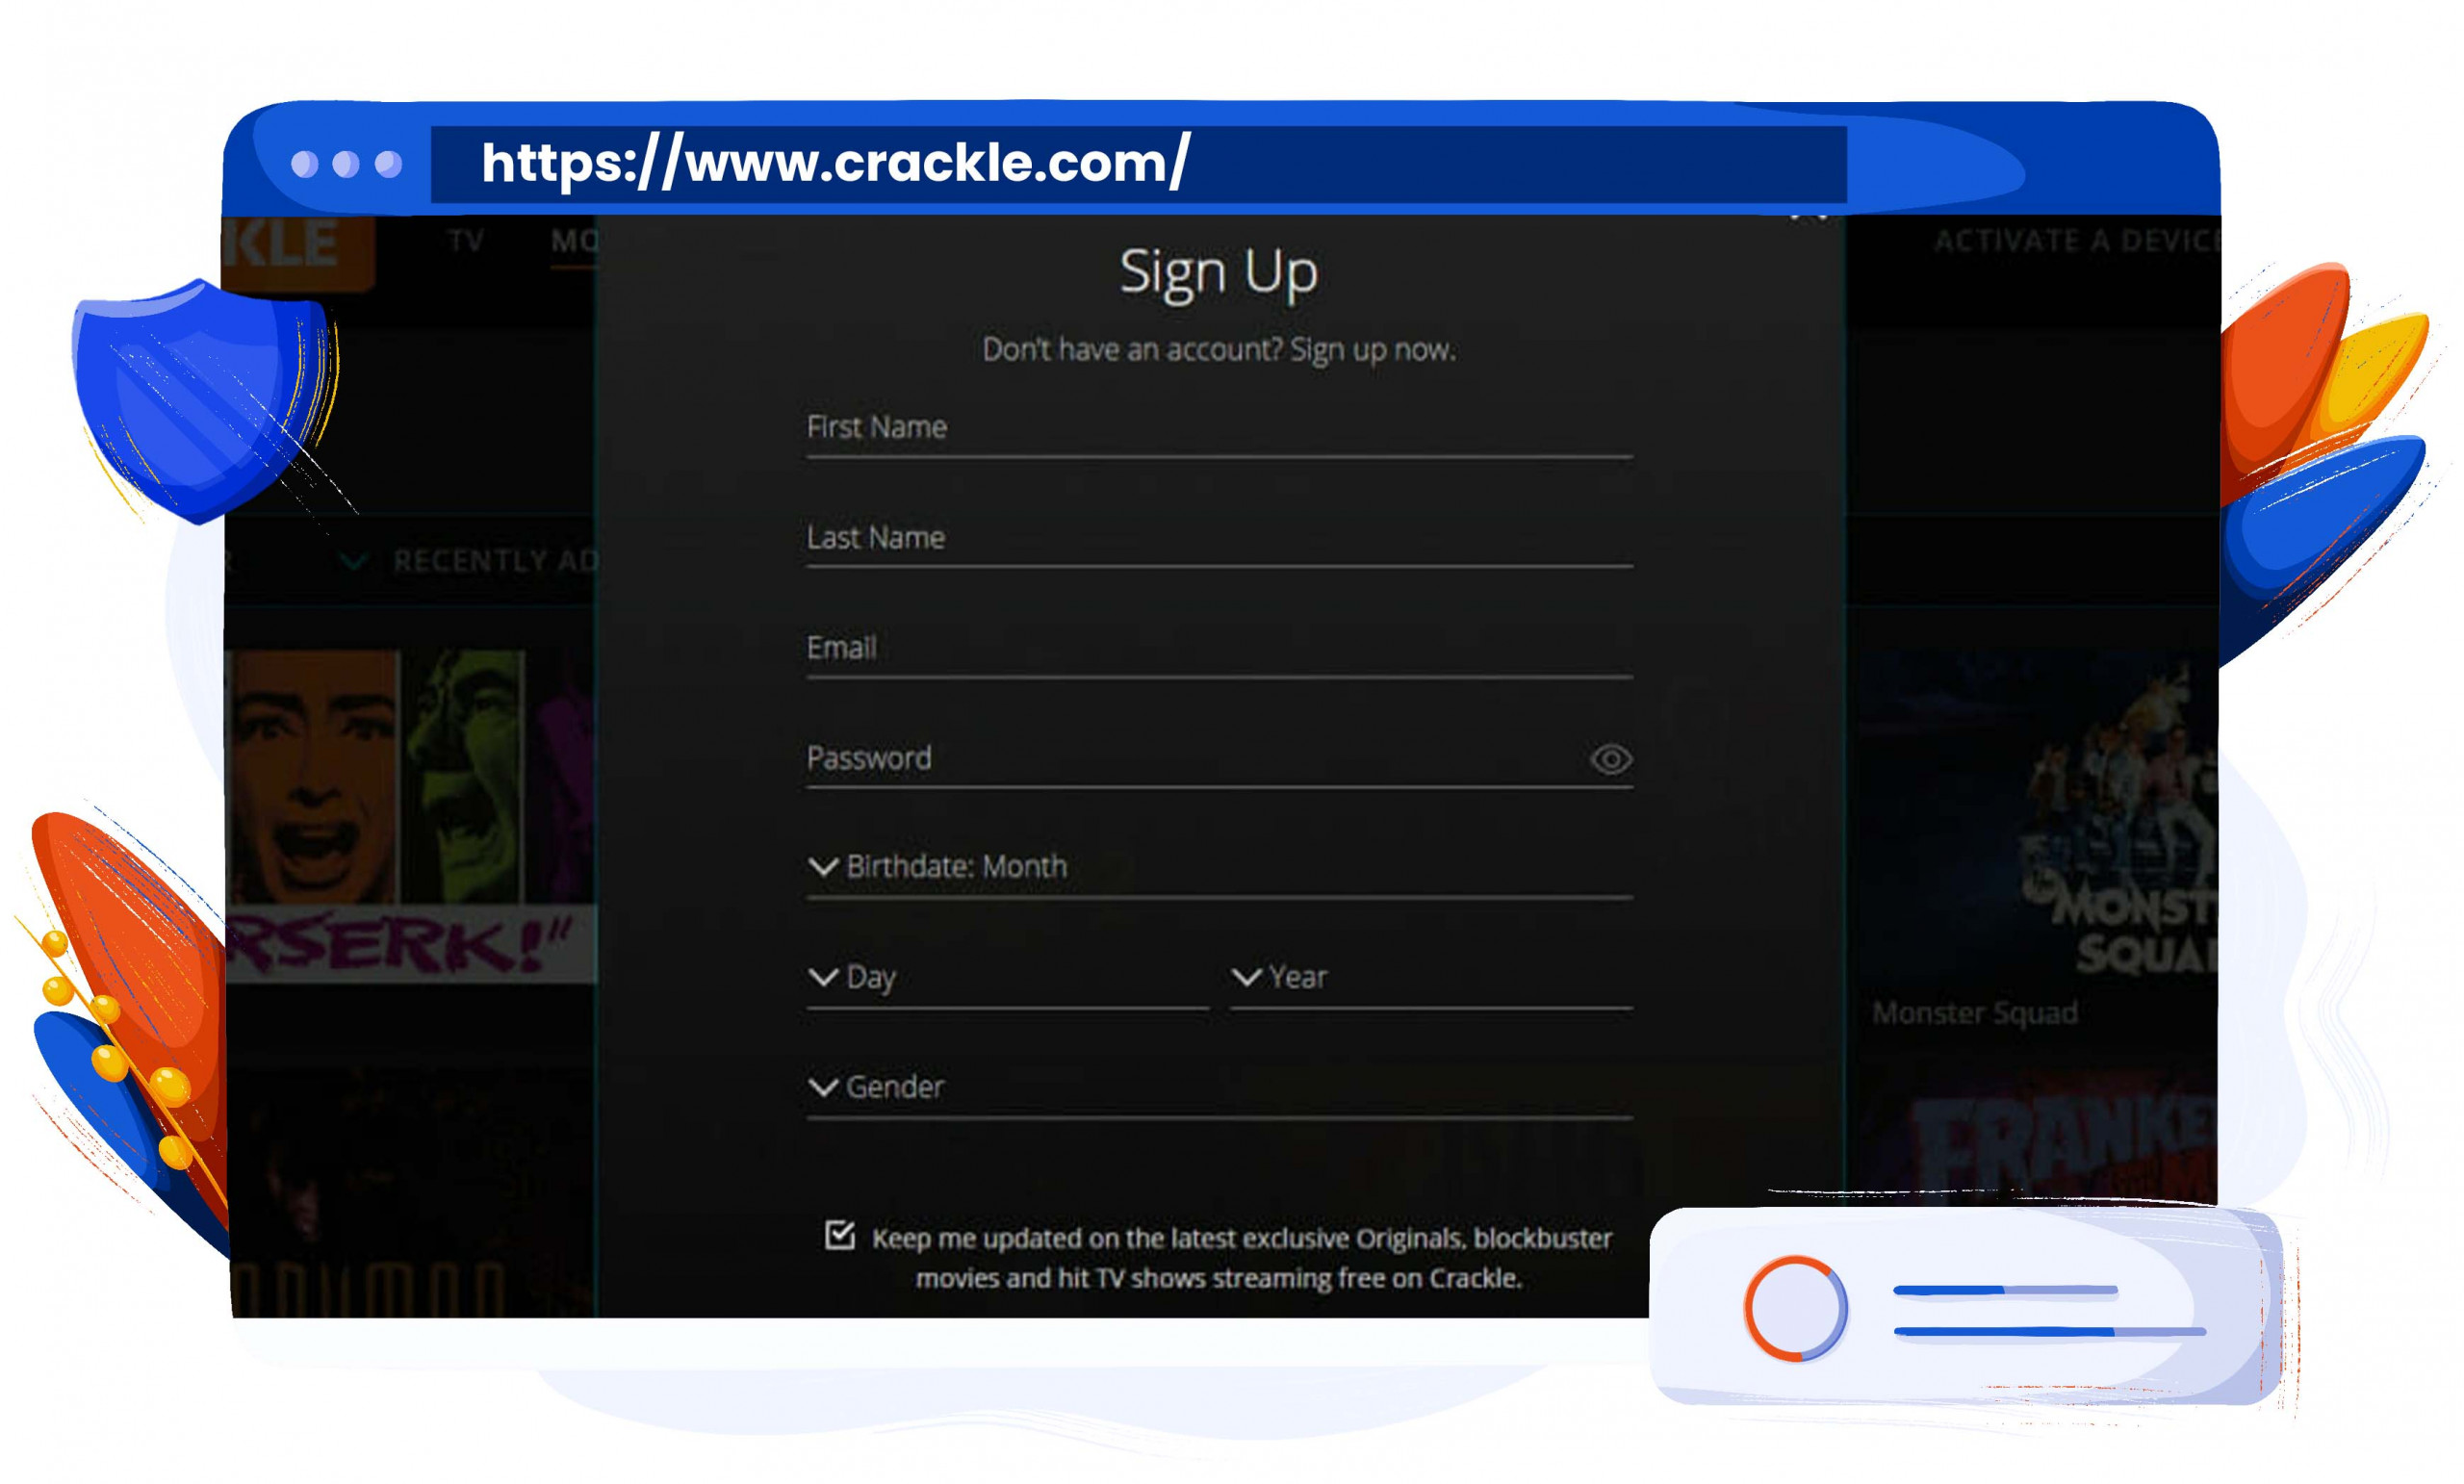 How to sign up for Crackle